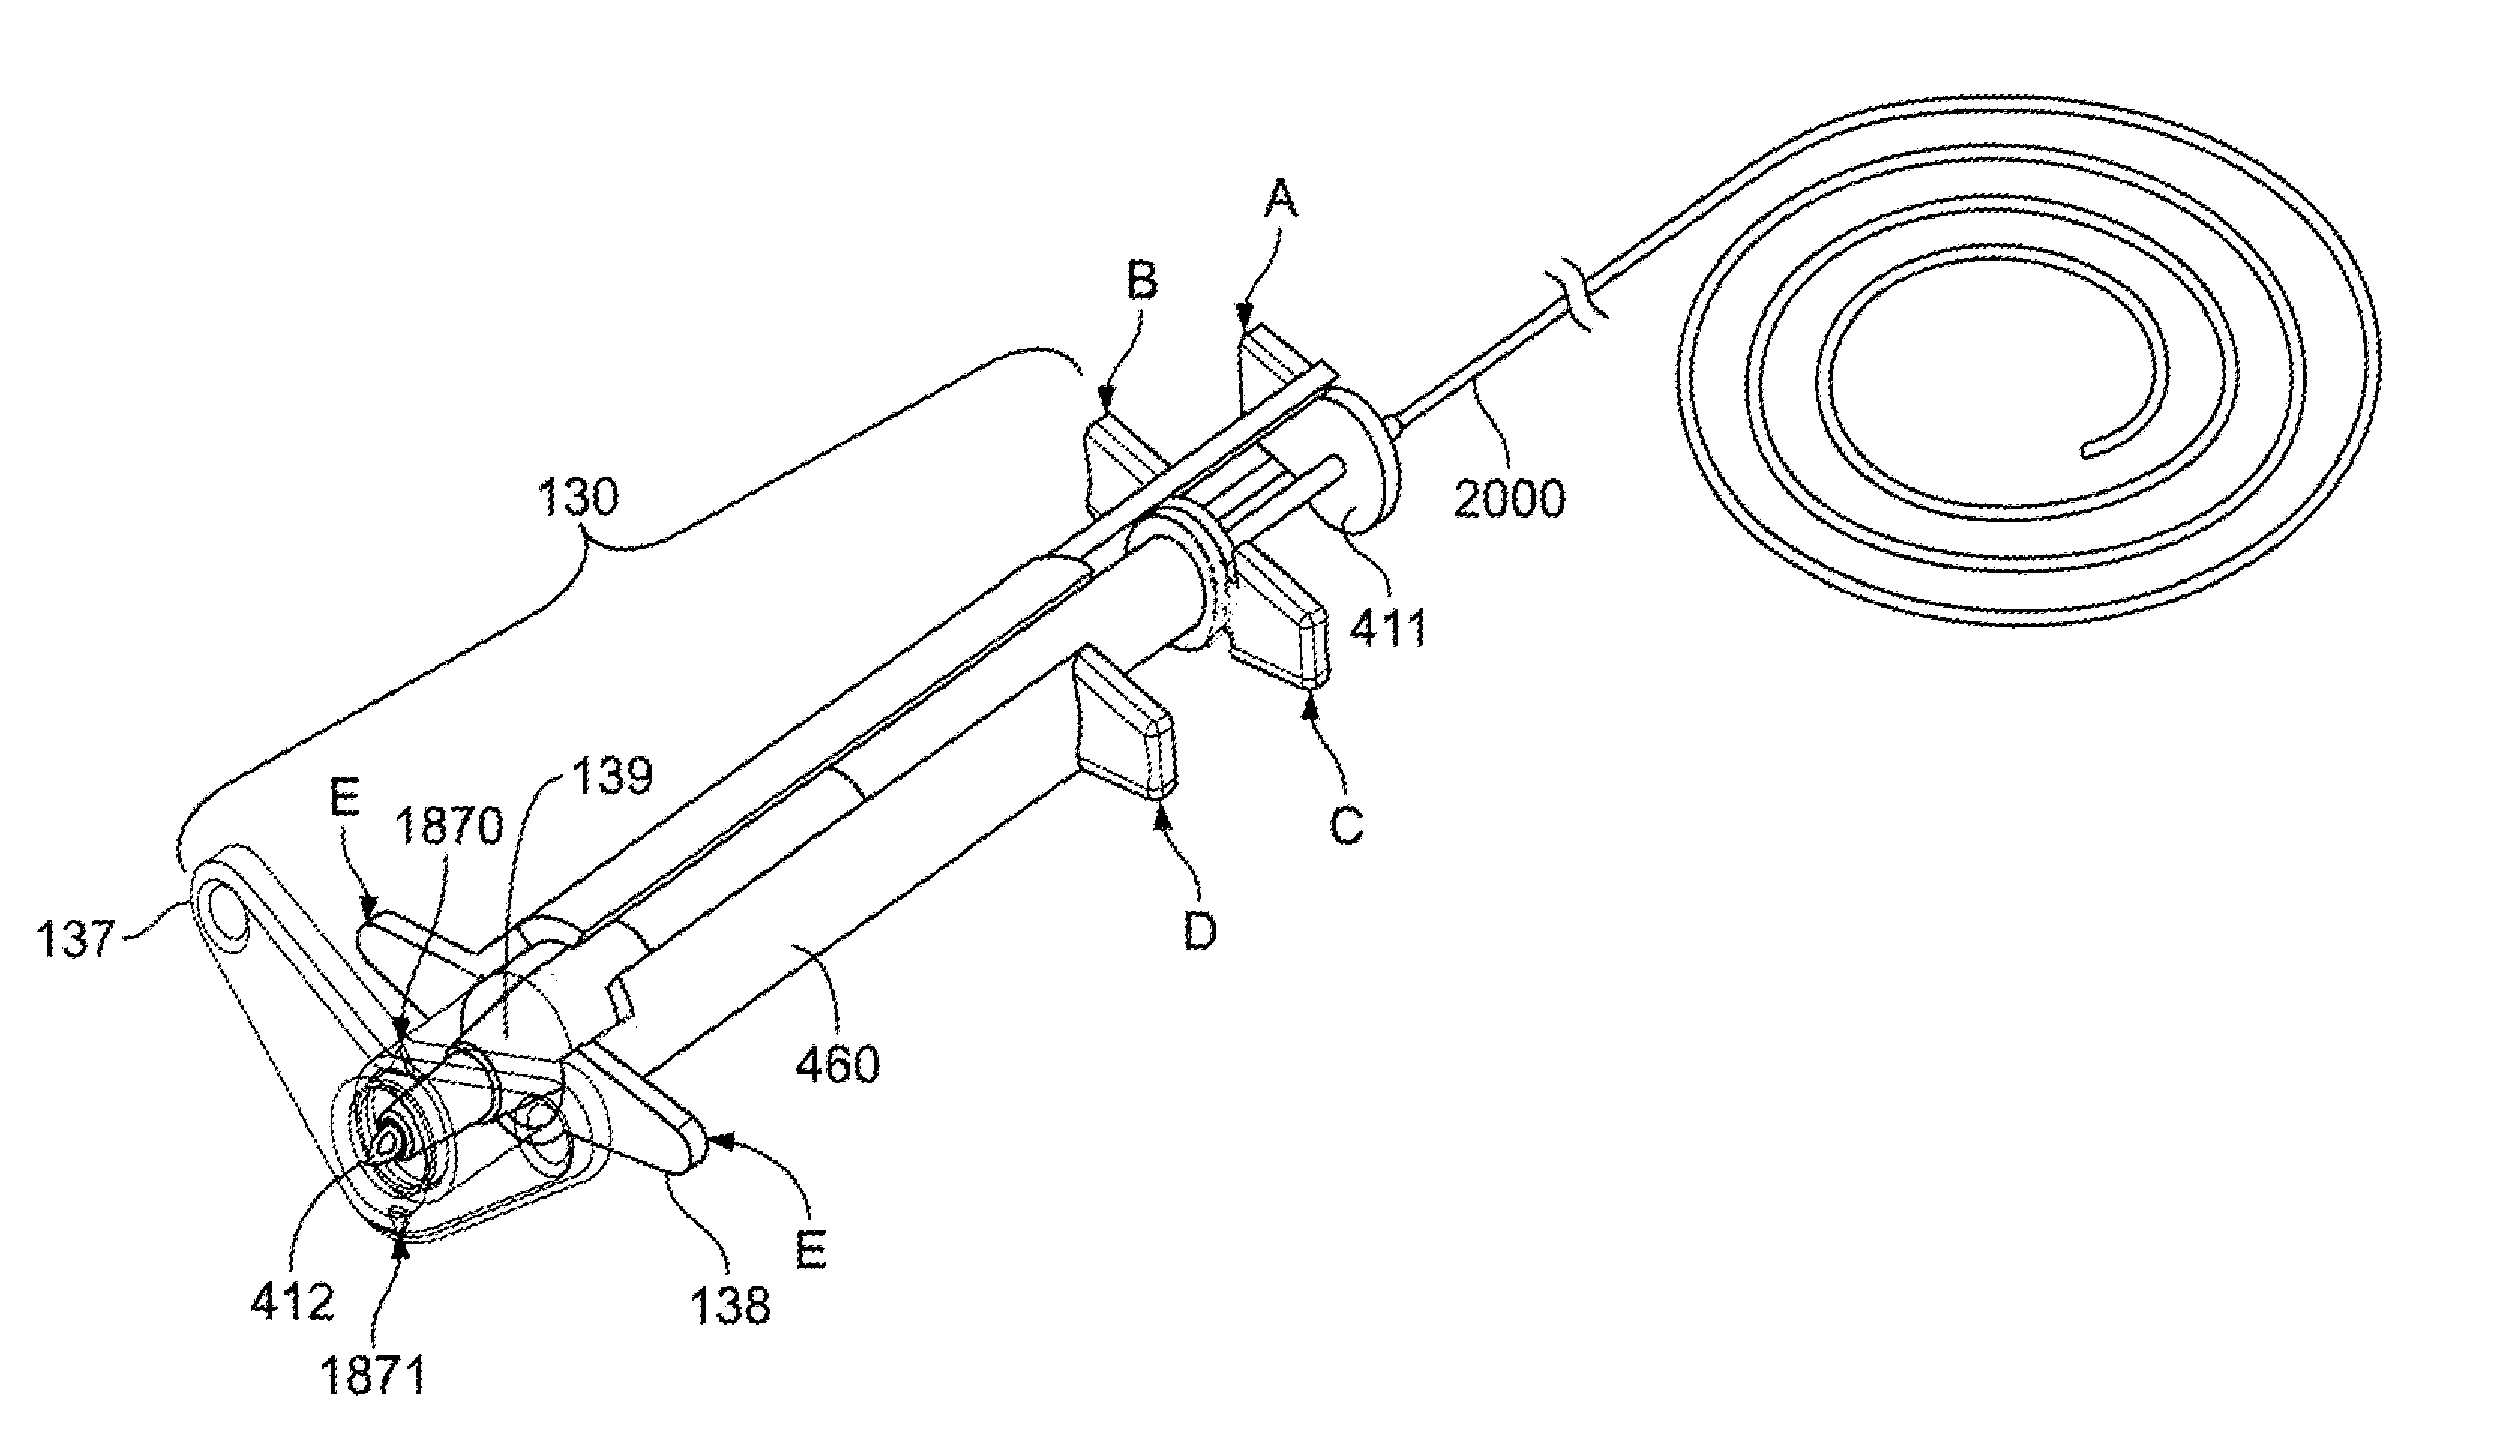 Everting device and method for tracheostomy